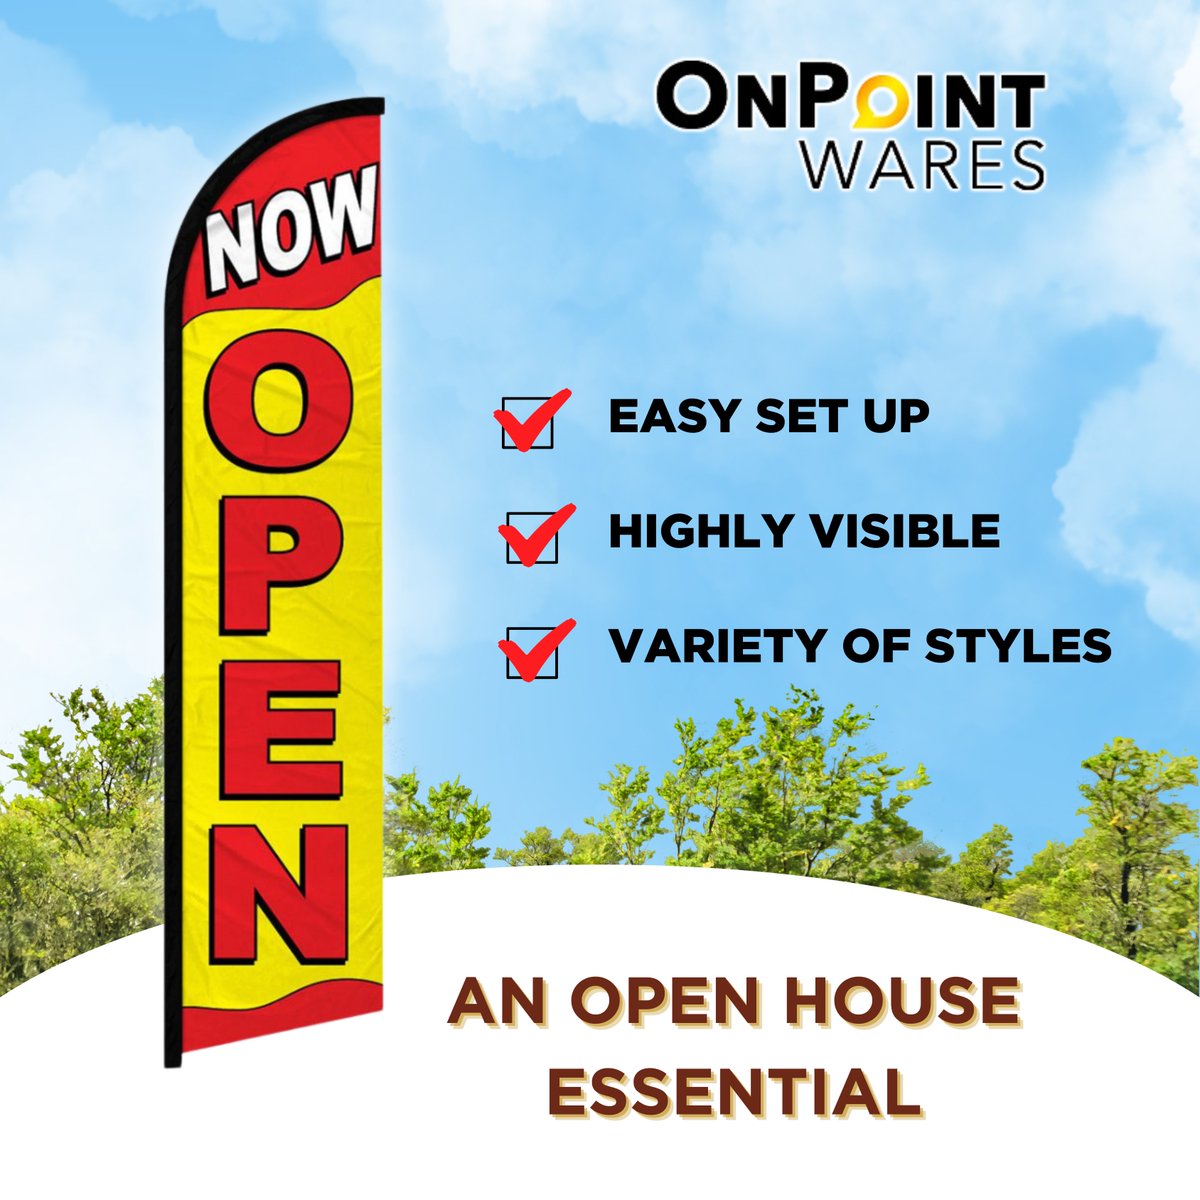 Opening a new business or having an open house? We have just the flag to get you more foot traffic. Our Now Open flag is not only easy to set up but also eye catching. Order yours today!
walmart.com/ip/OnPoint-War…
#BusinessFlag #newbusiness #businessmarketing #MarketingStrategy